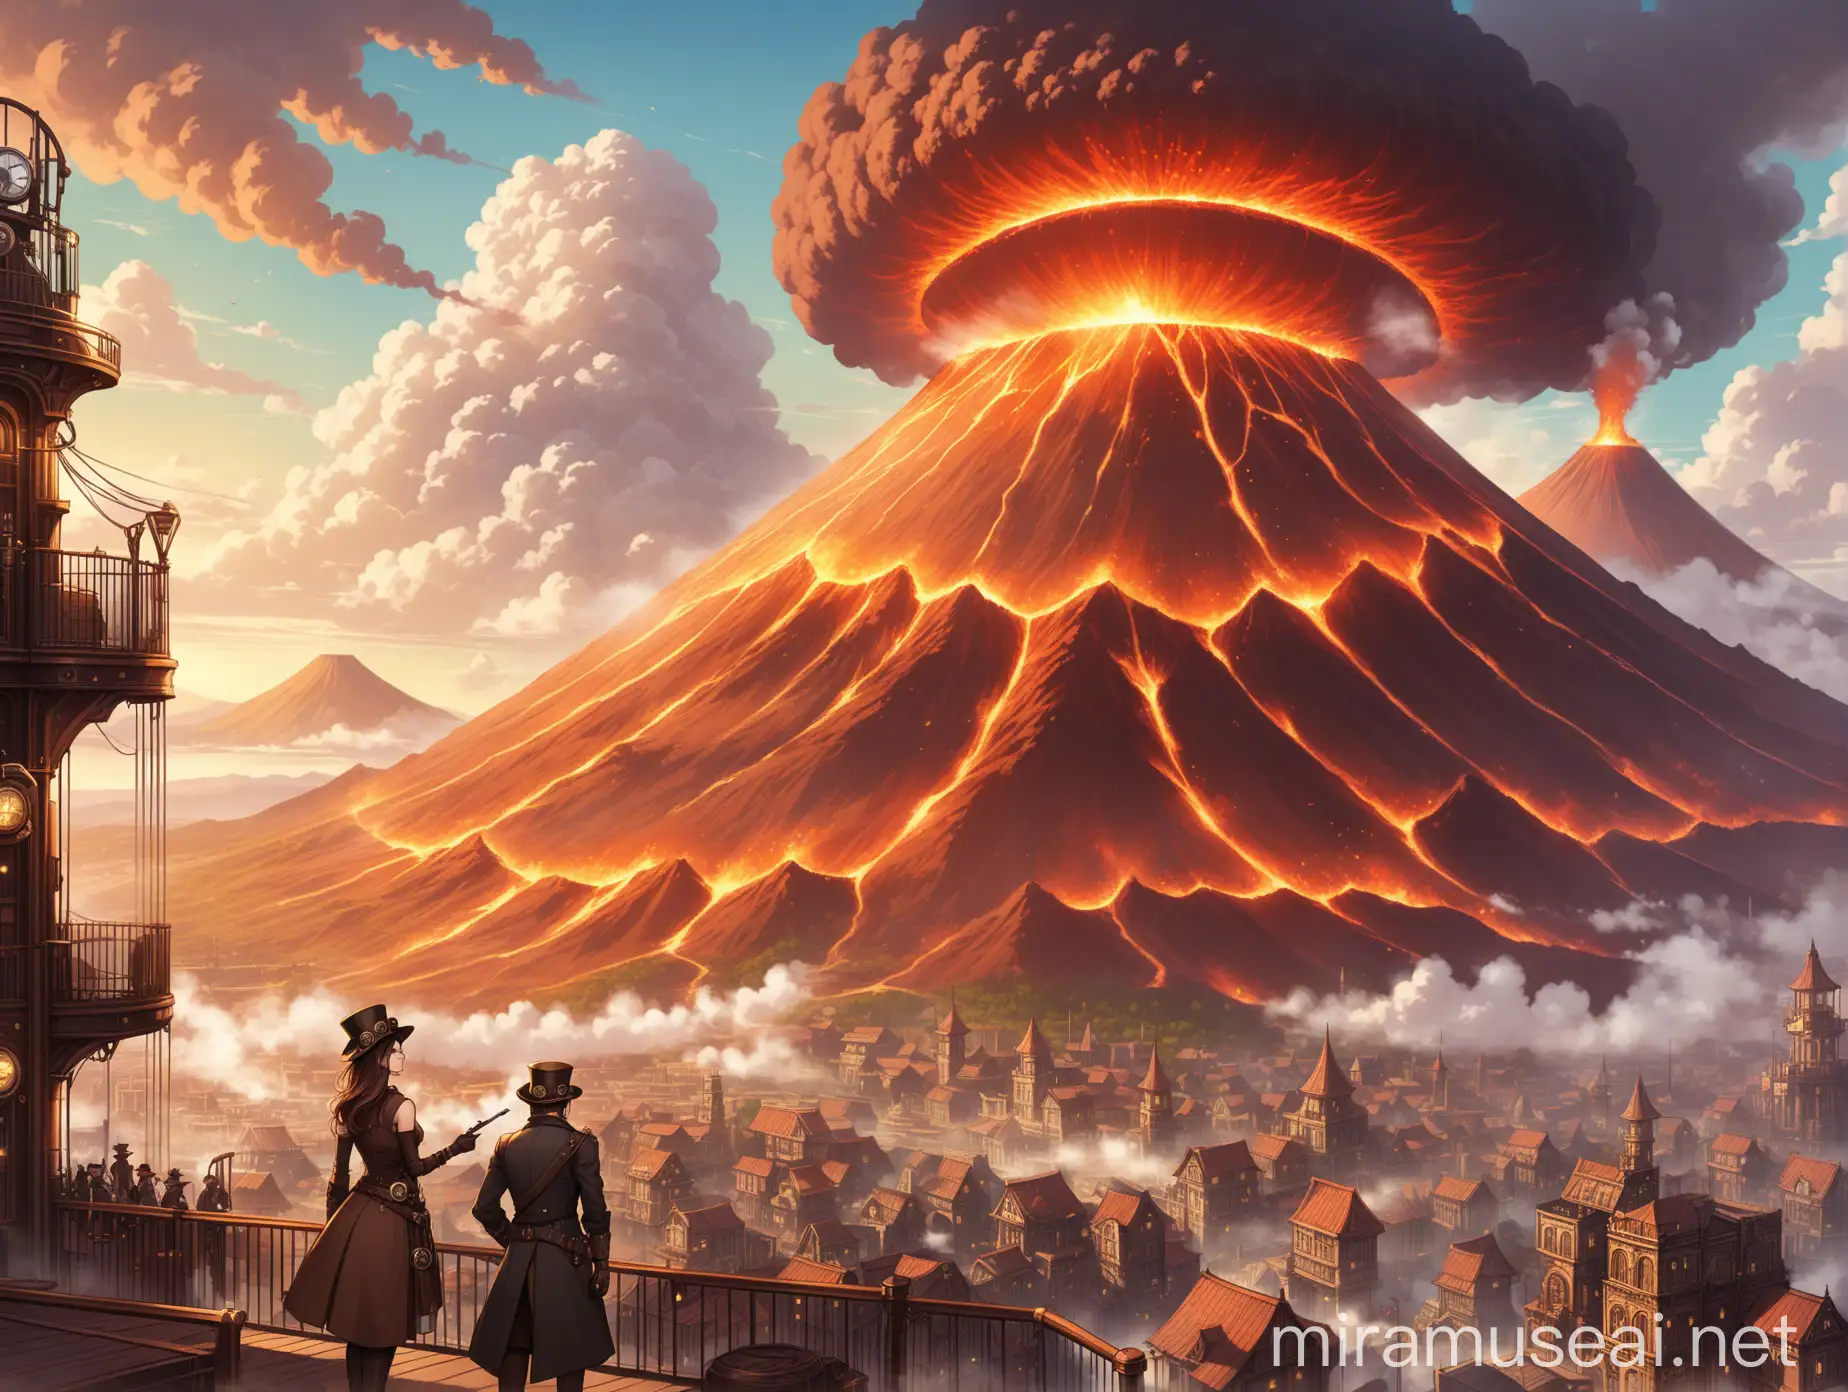 a steampunk city fantasy in front of a smoking colossal shield volcano